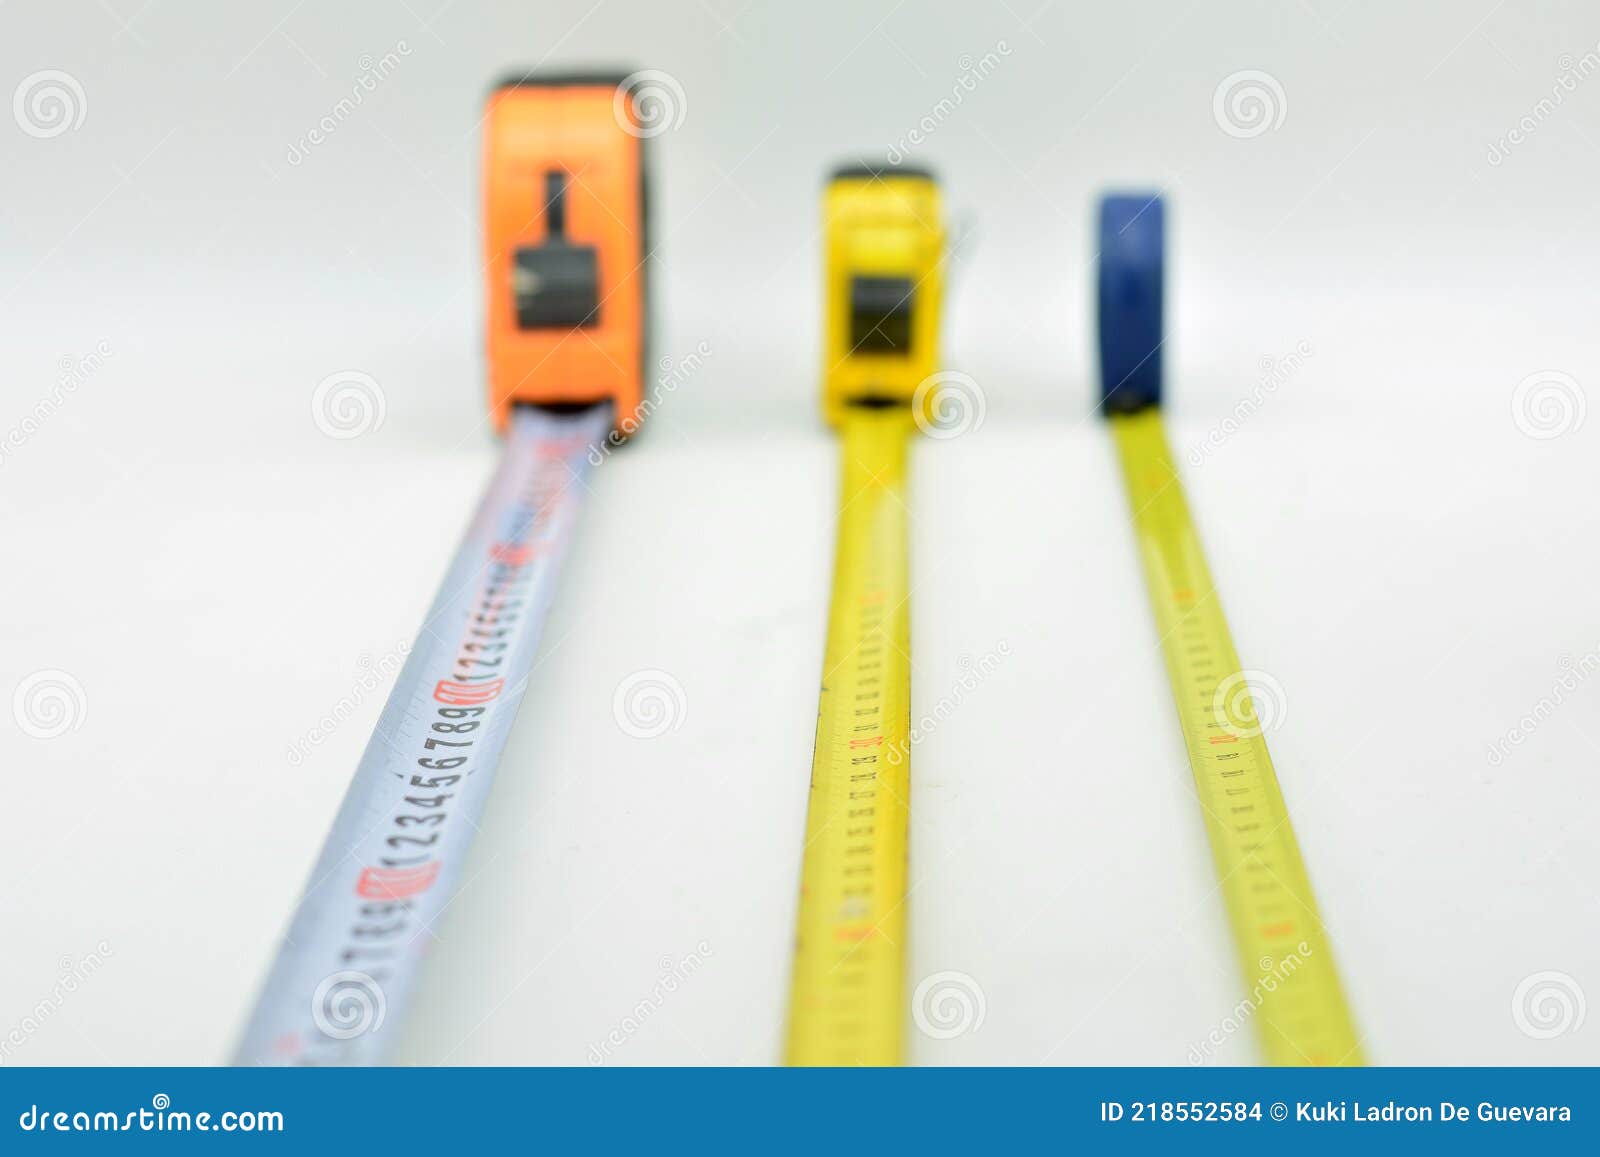 taking measurements with a meter